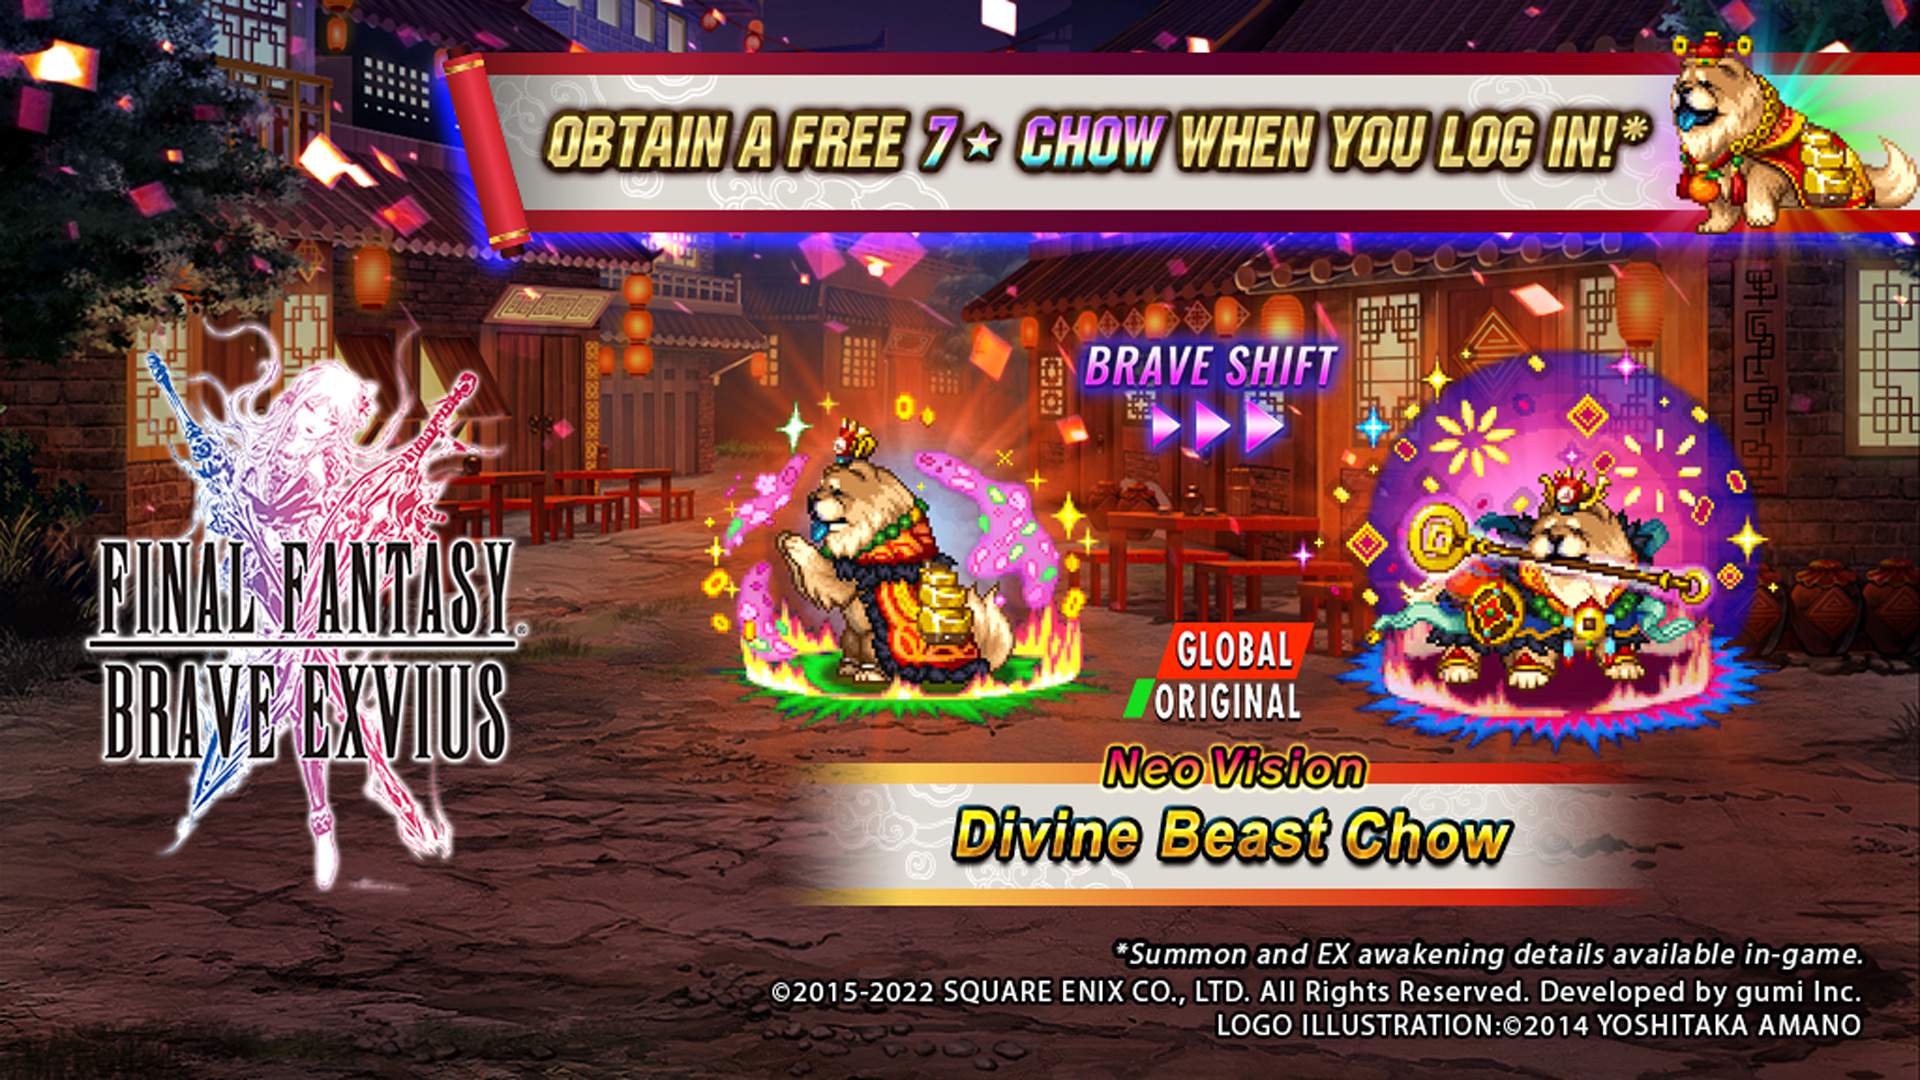 Chow, the global original unit, is shown in his new Neo Vision form before and after brave shift